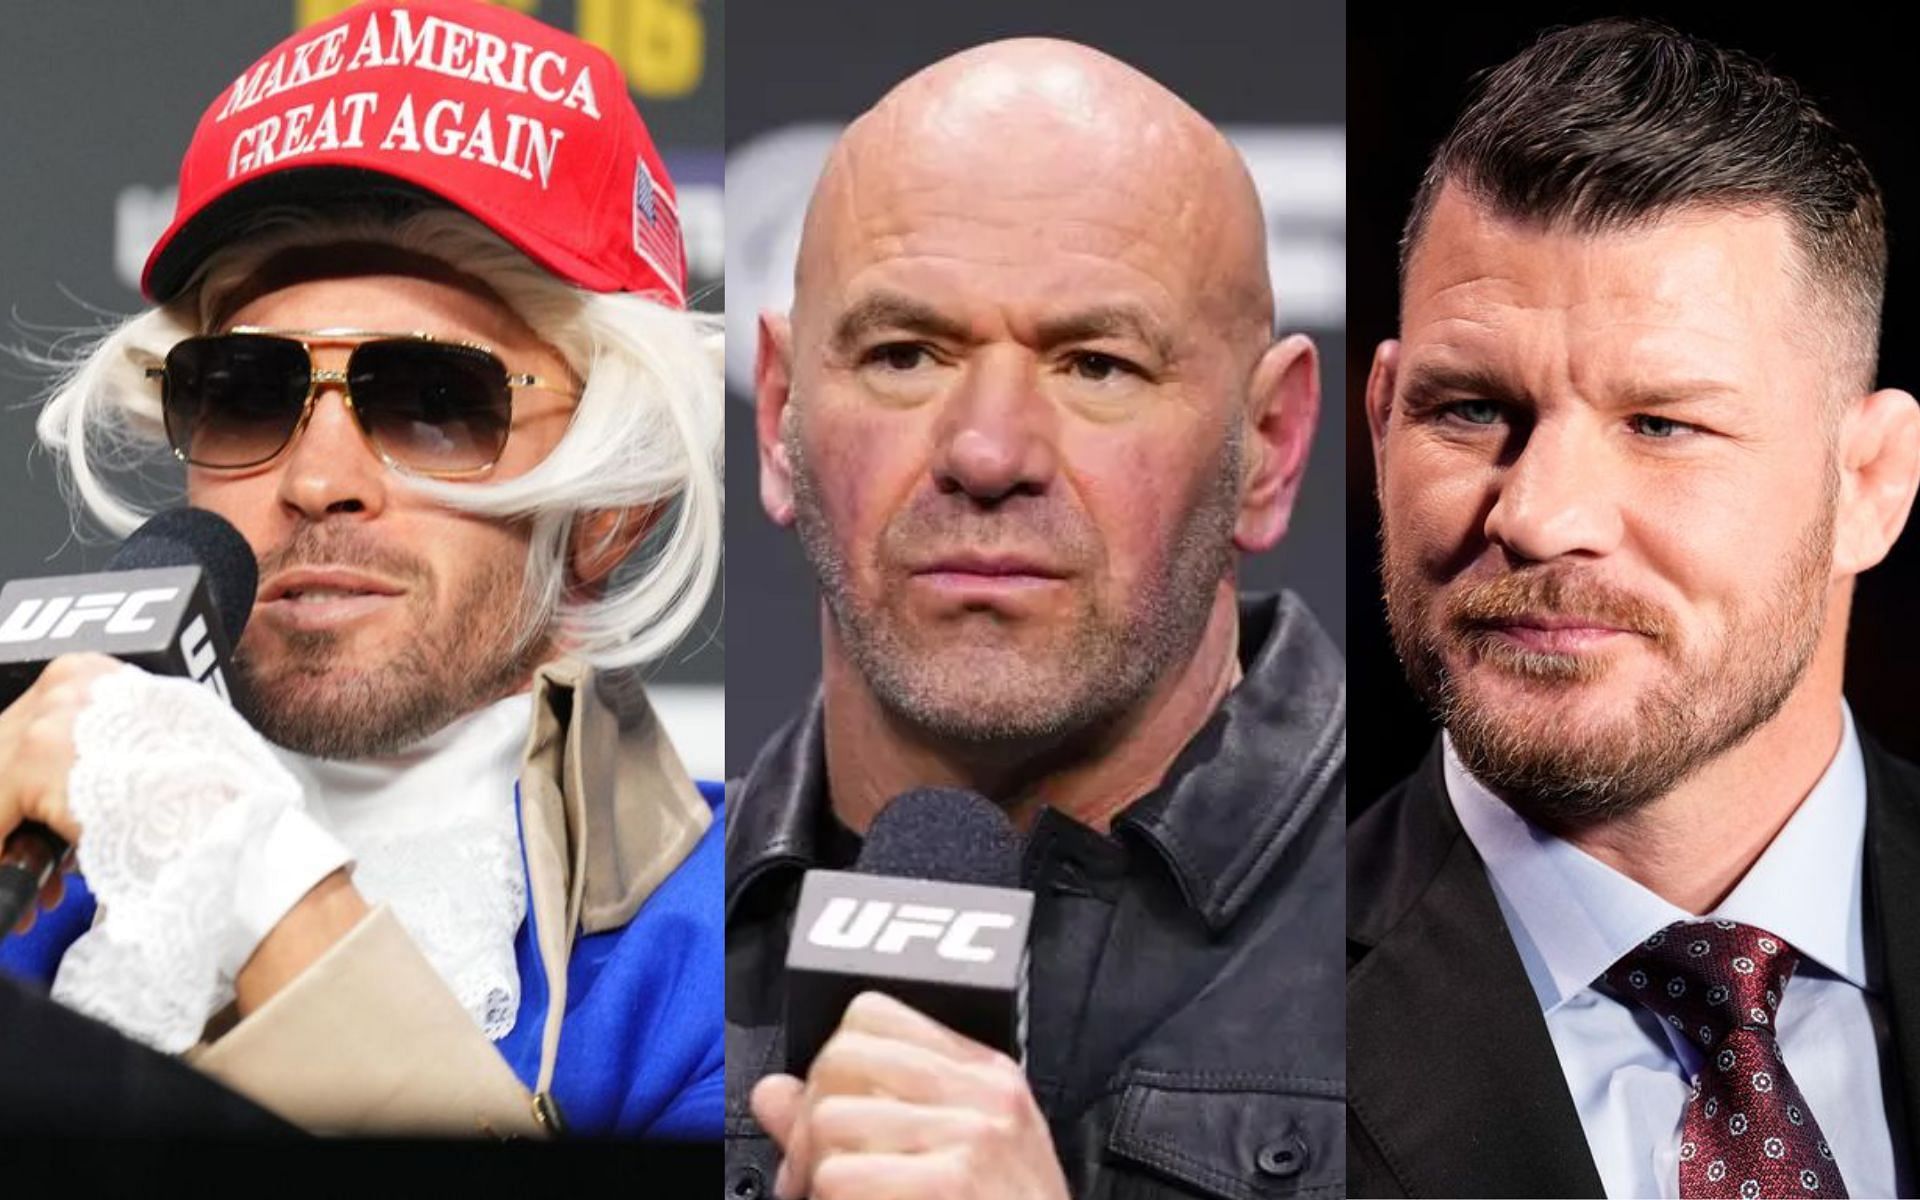 Colby Covington (left), Dana White (centre), and Michael Bisping (right). (via Getty Images)